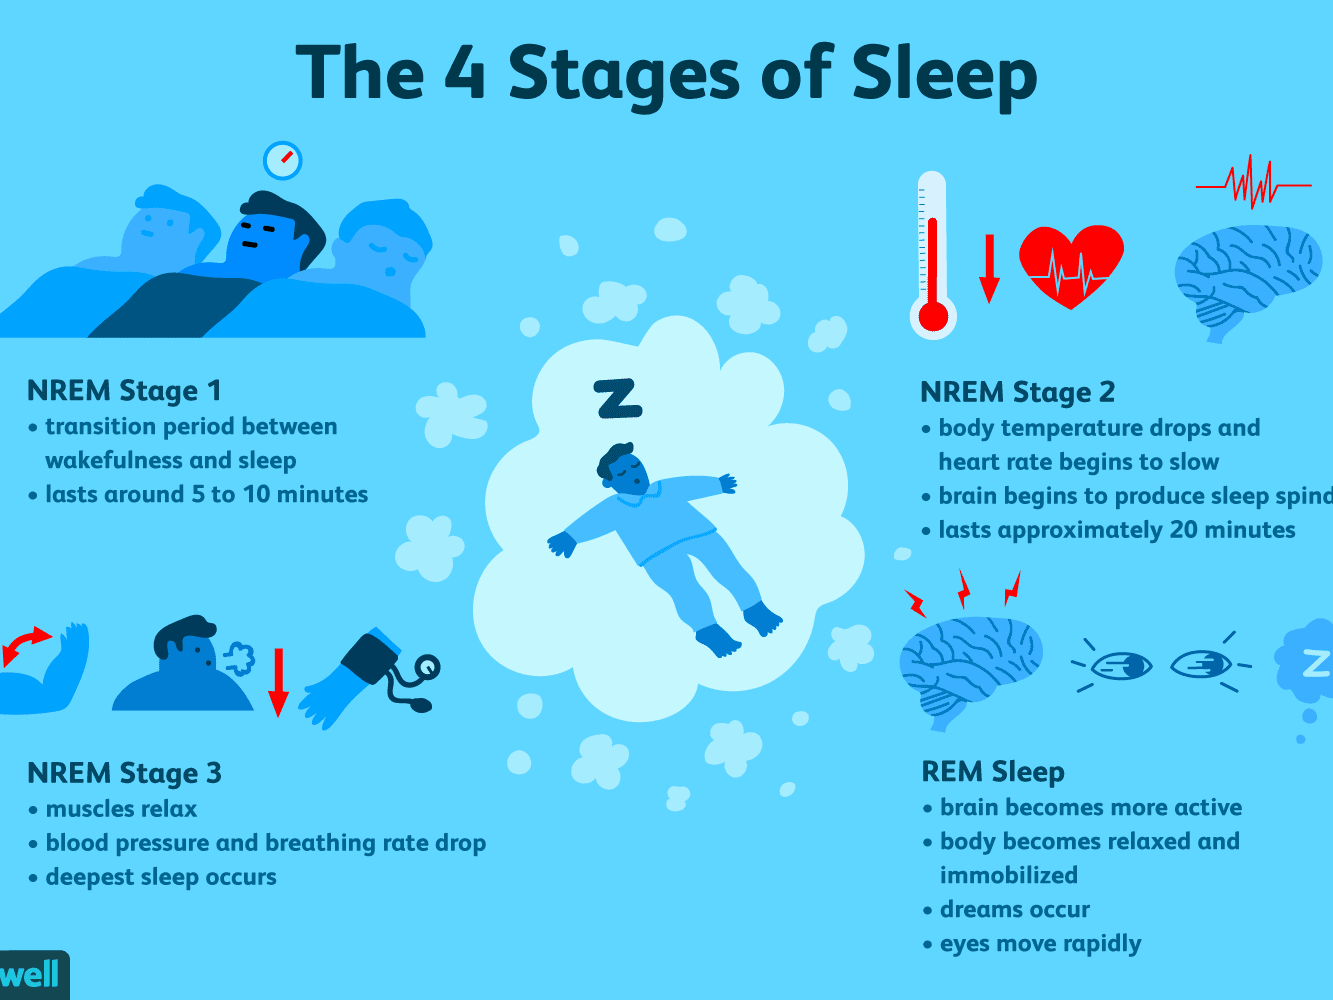 The 4 Stages of Sleep (NREM and REM Sleep Cycles)